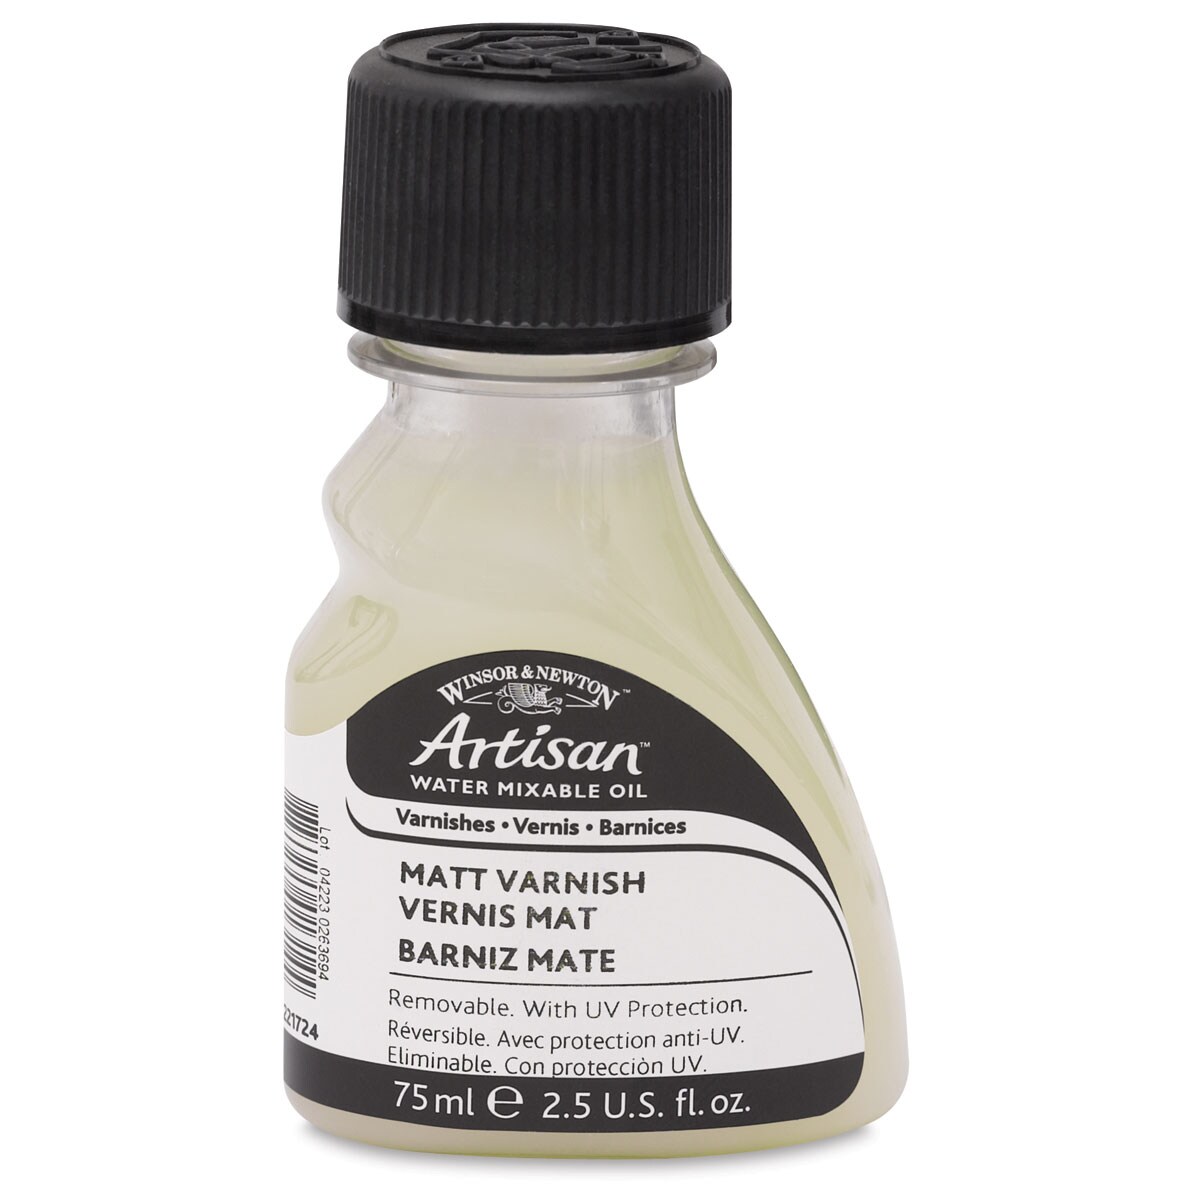 How to varnish a painting created with Artisan water mixable oil